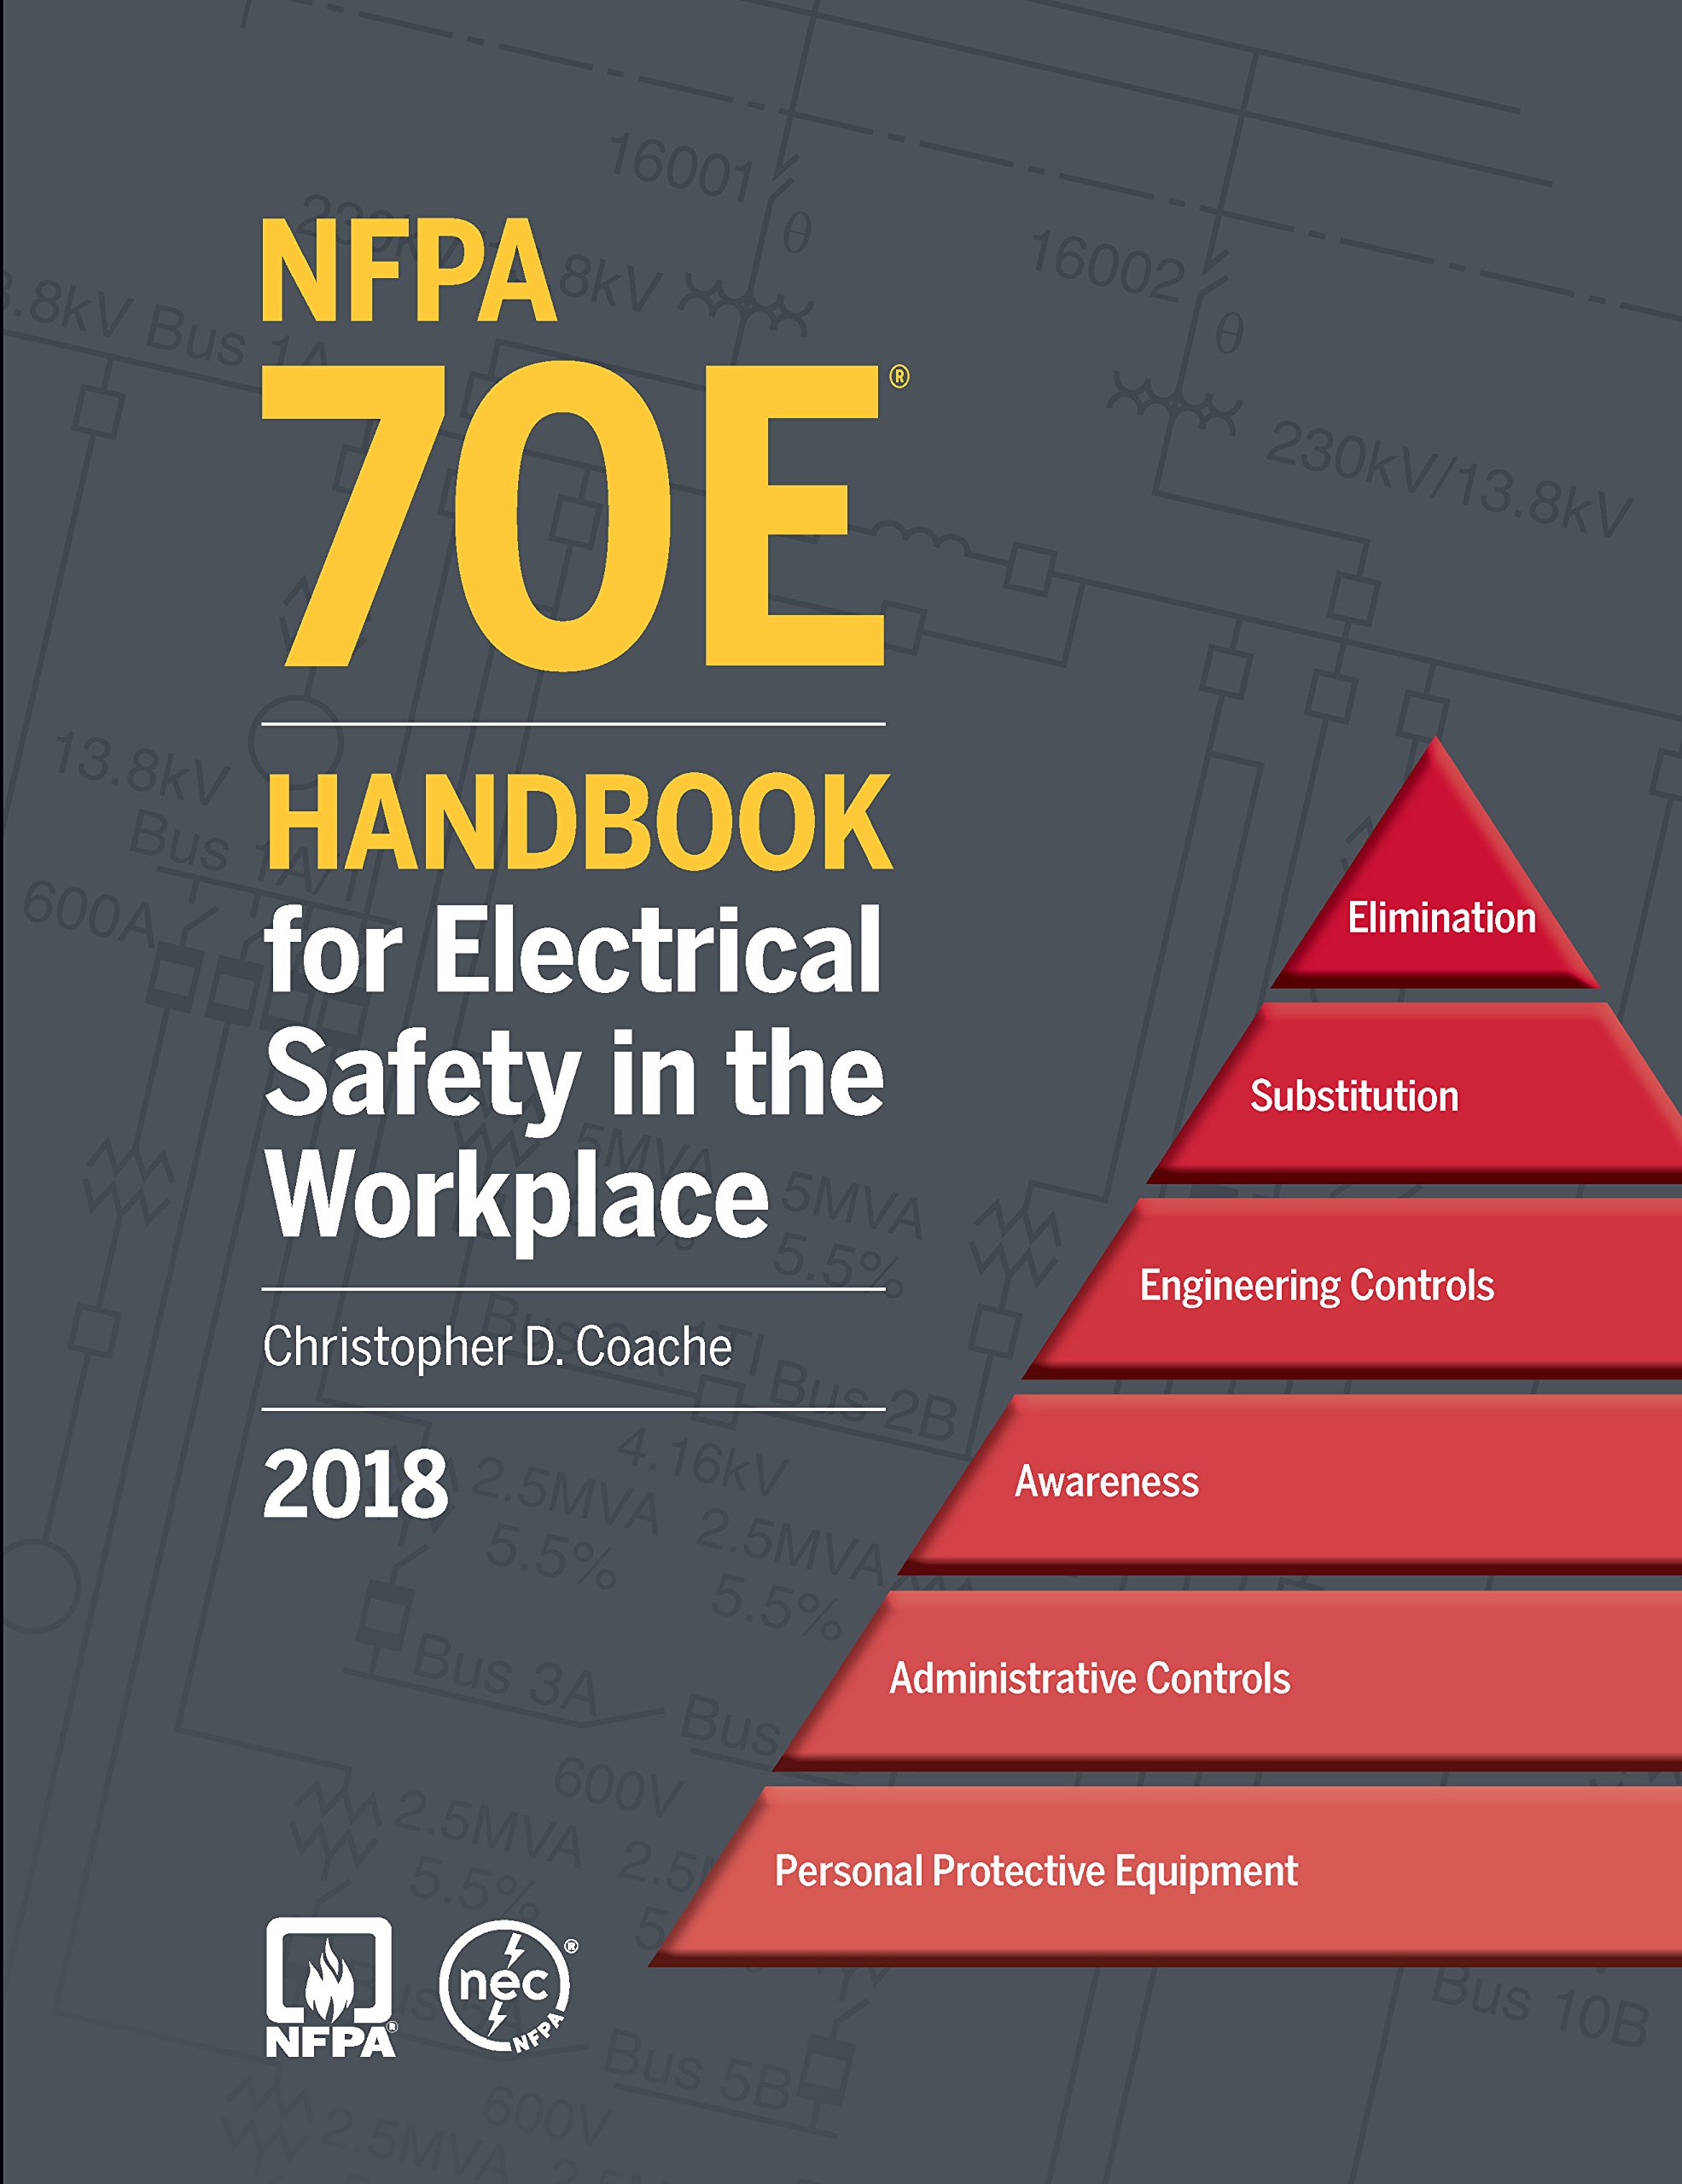 NFPA 70E: Handbook for Electrical Safety in the Workplace